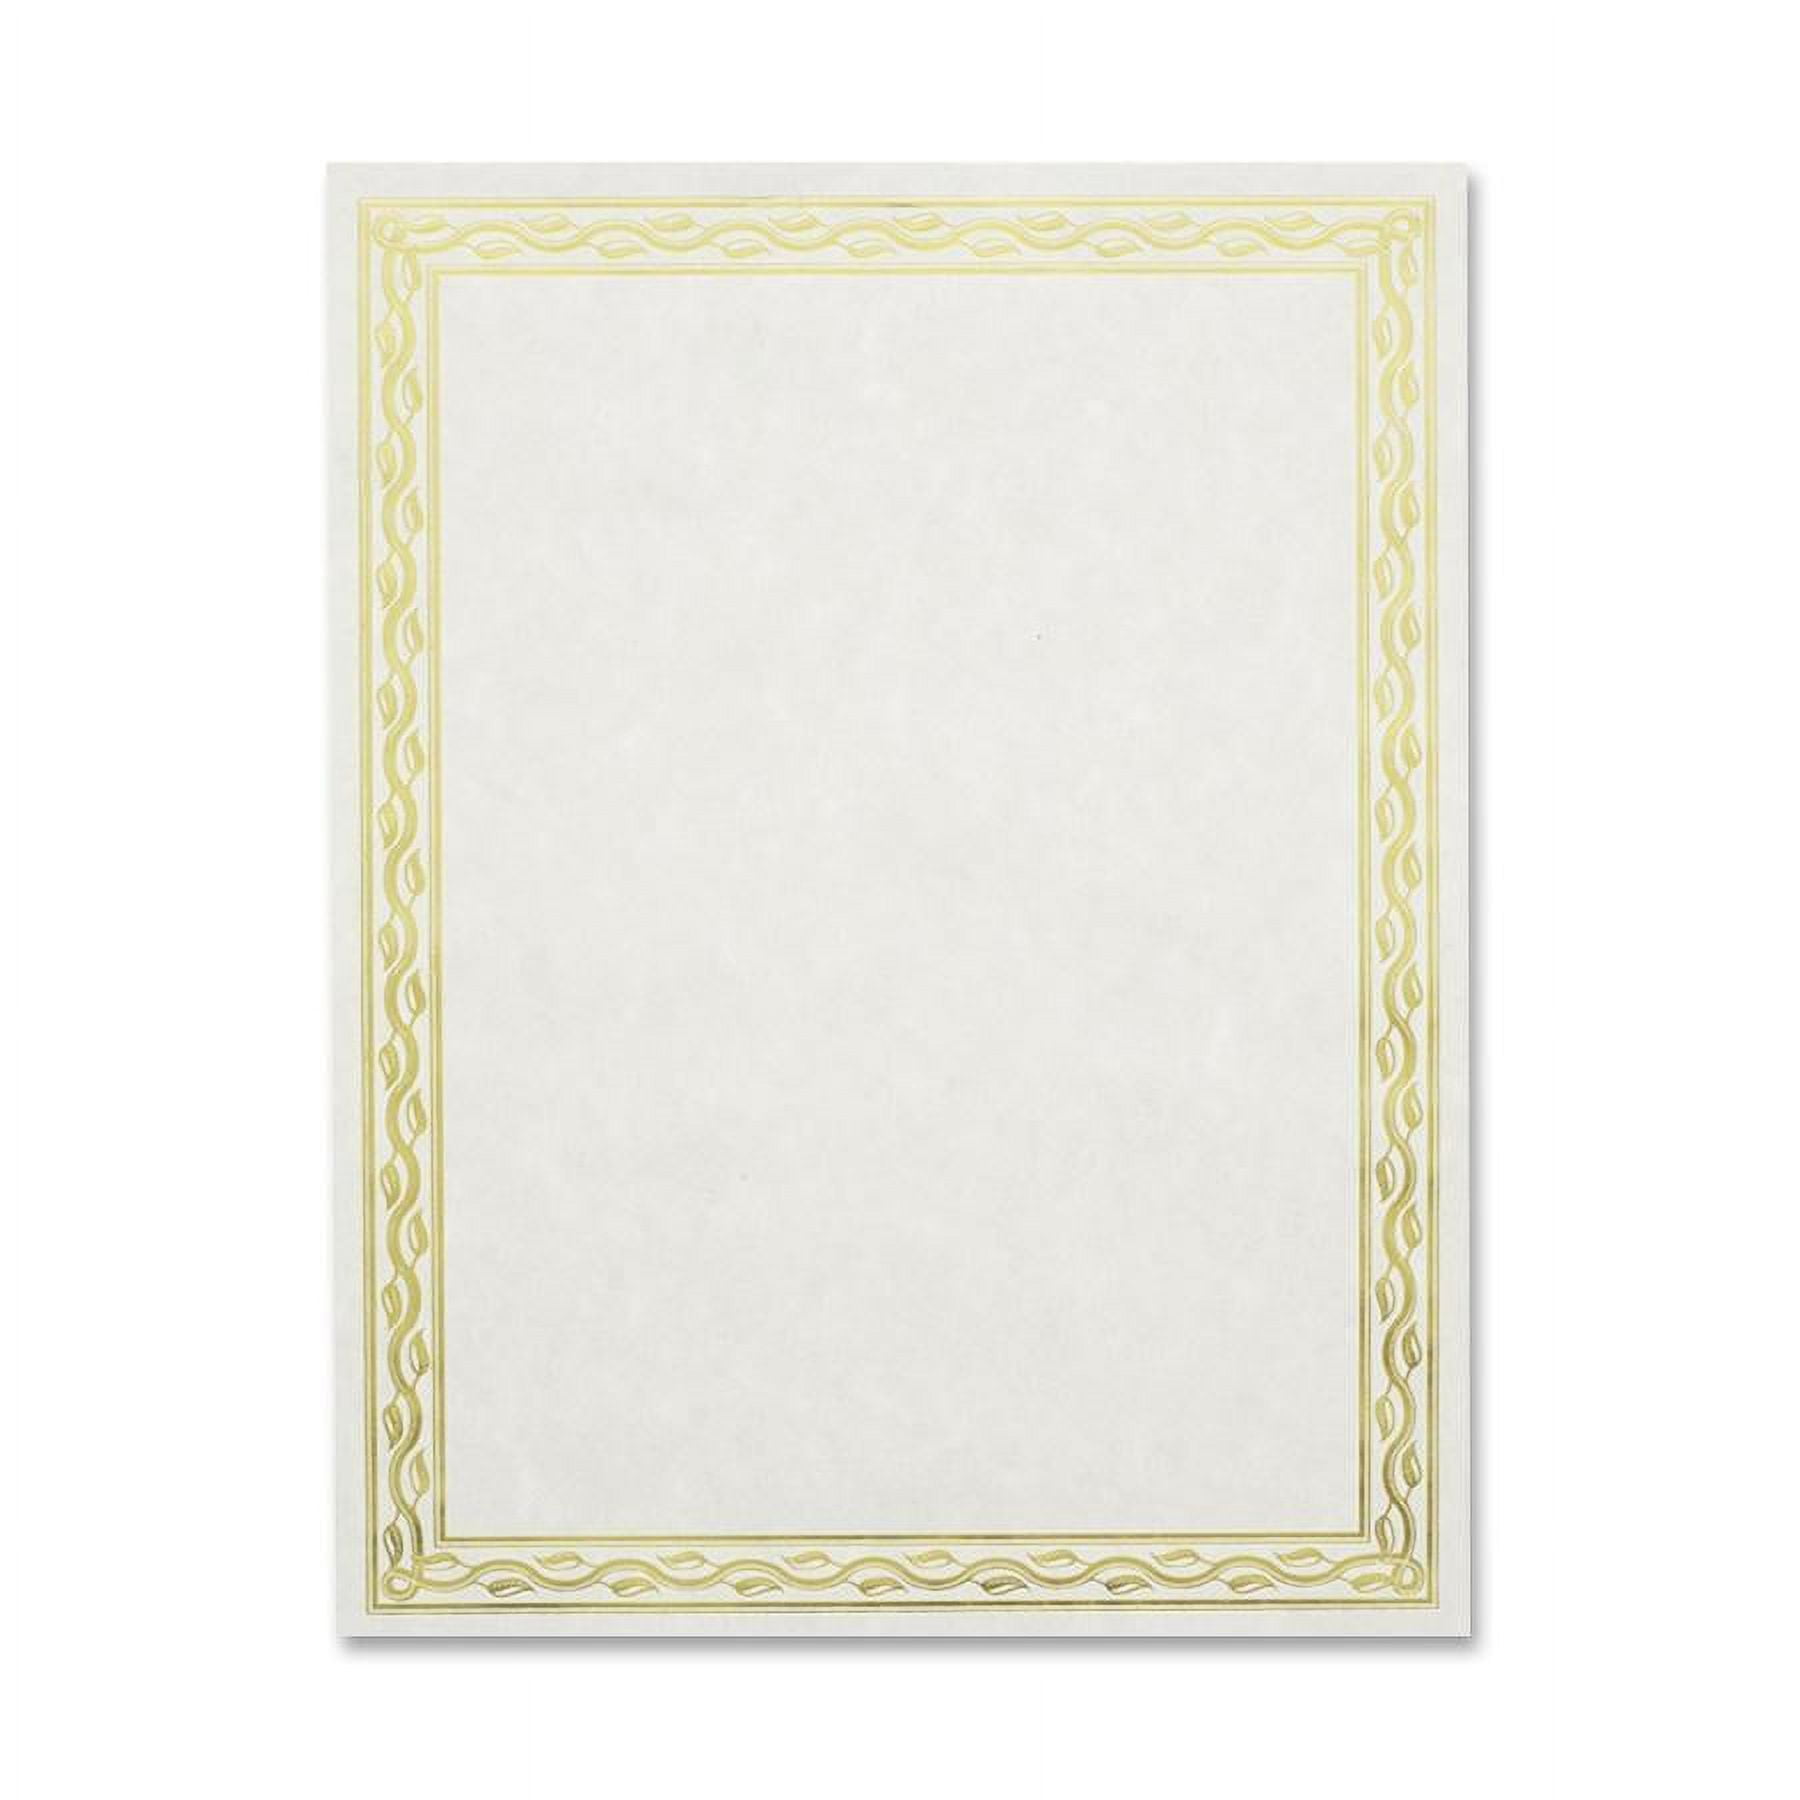 48 Pack Certificate Papers - Letter Size Blank Award Certificates Paper,  Gold Foil Border Specialty Recognition Diploma Paper, Laser and Inkjet